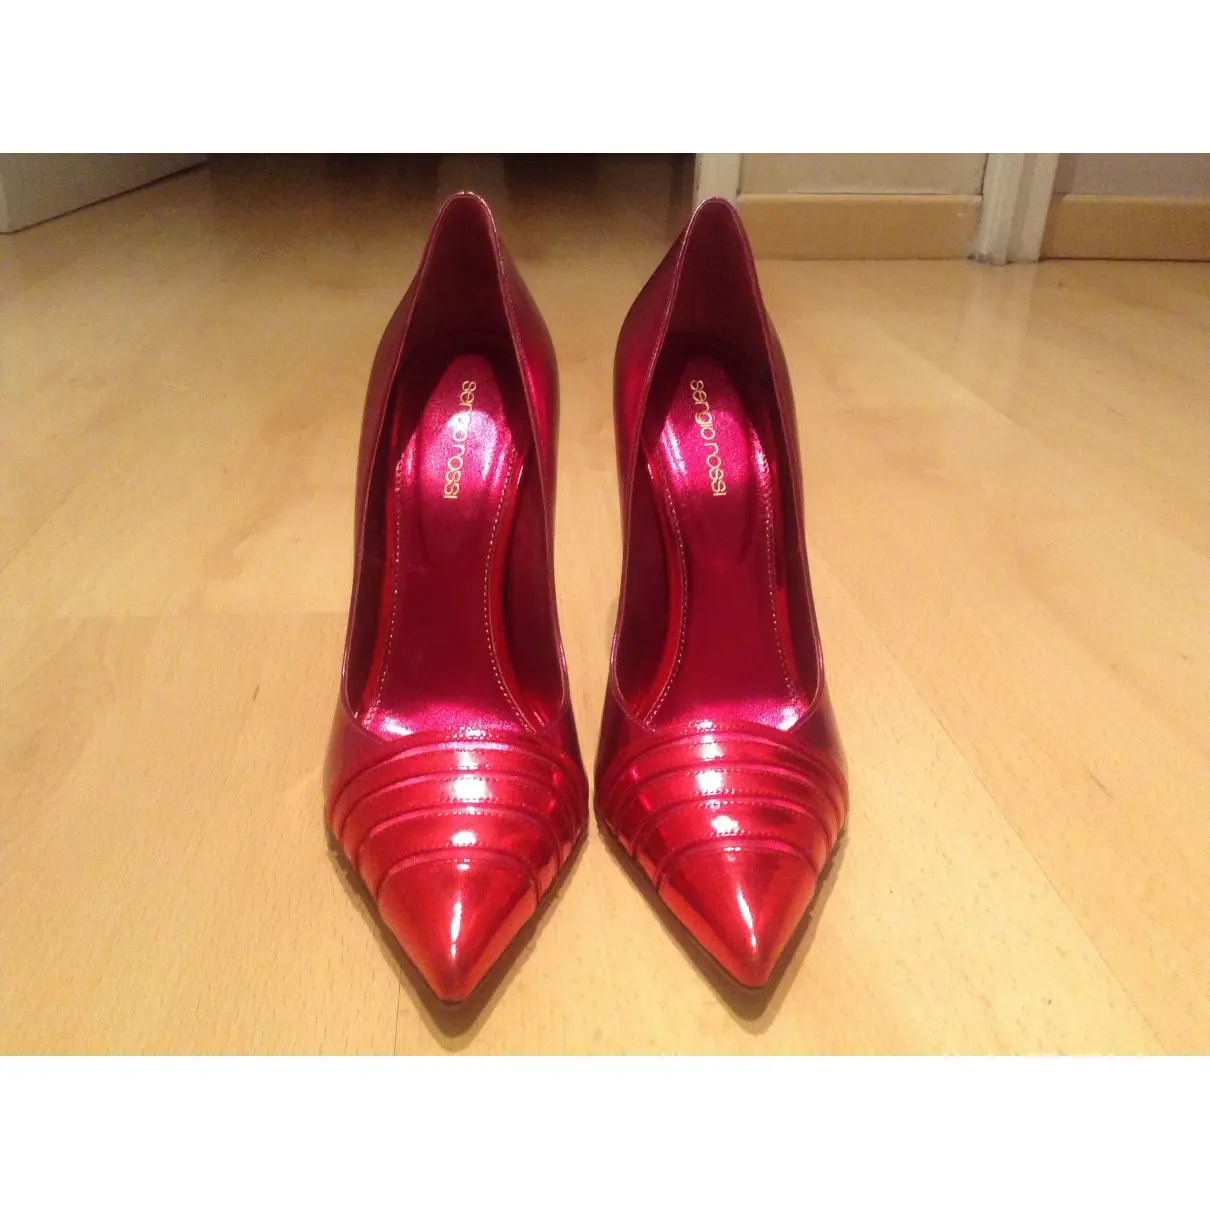 Sergio Rossi Patent leather heels for sale